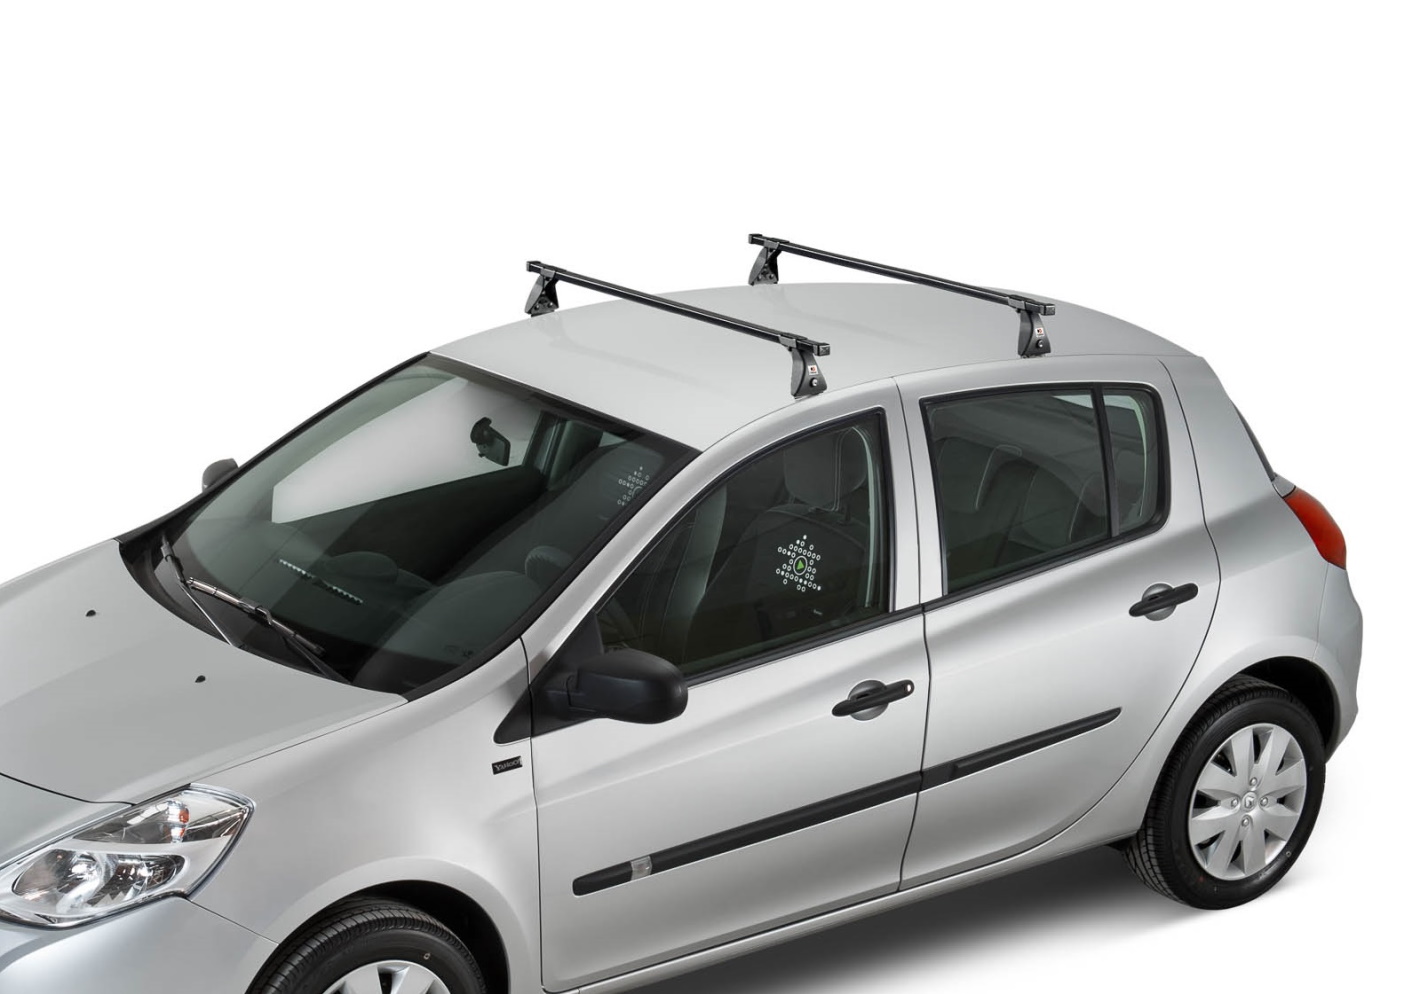 Ford Focus four door saloon (2005 to 2008):FIRRAK 115cm X roof bars with fitting kit 2054